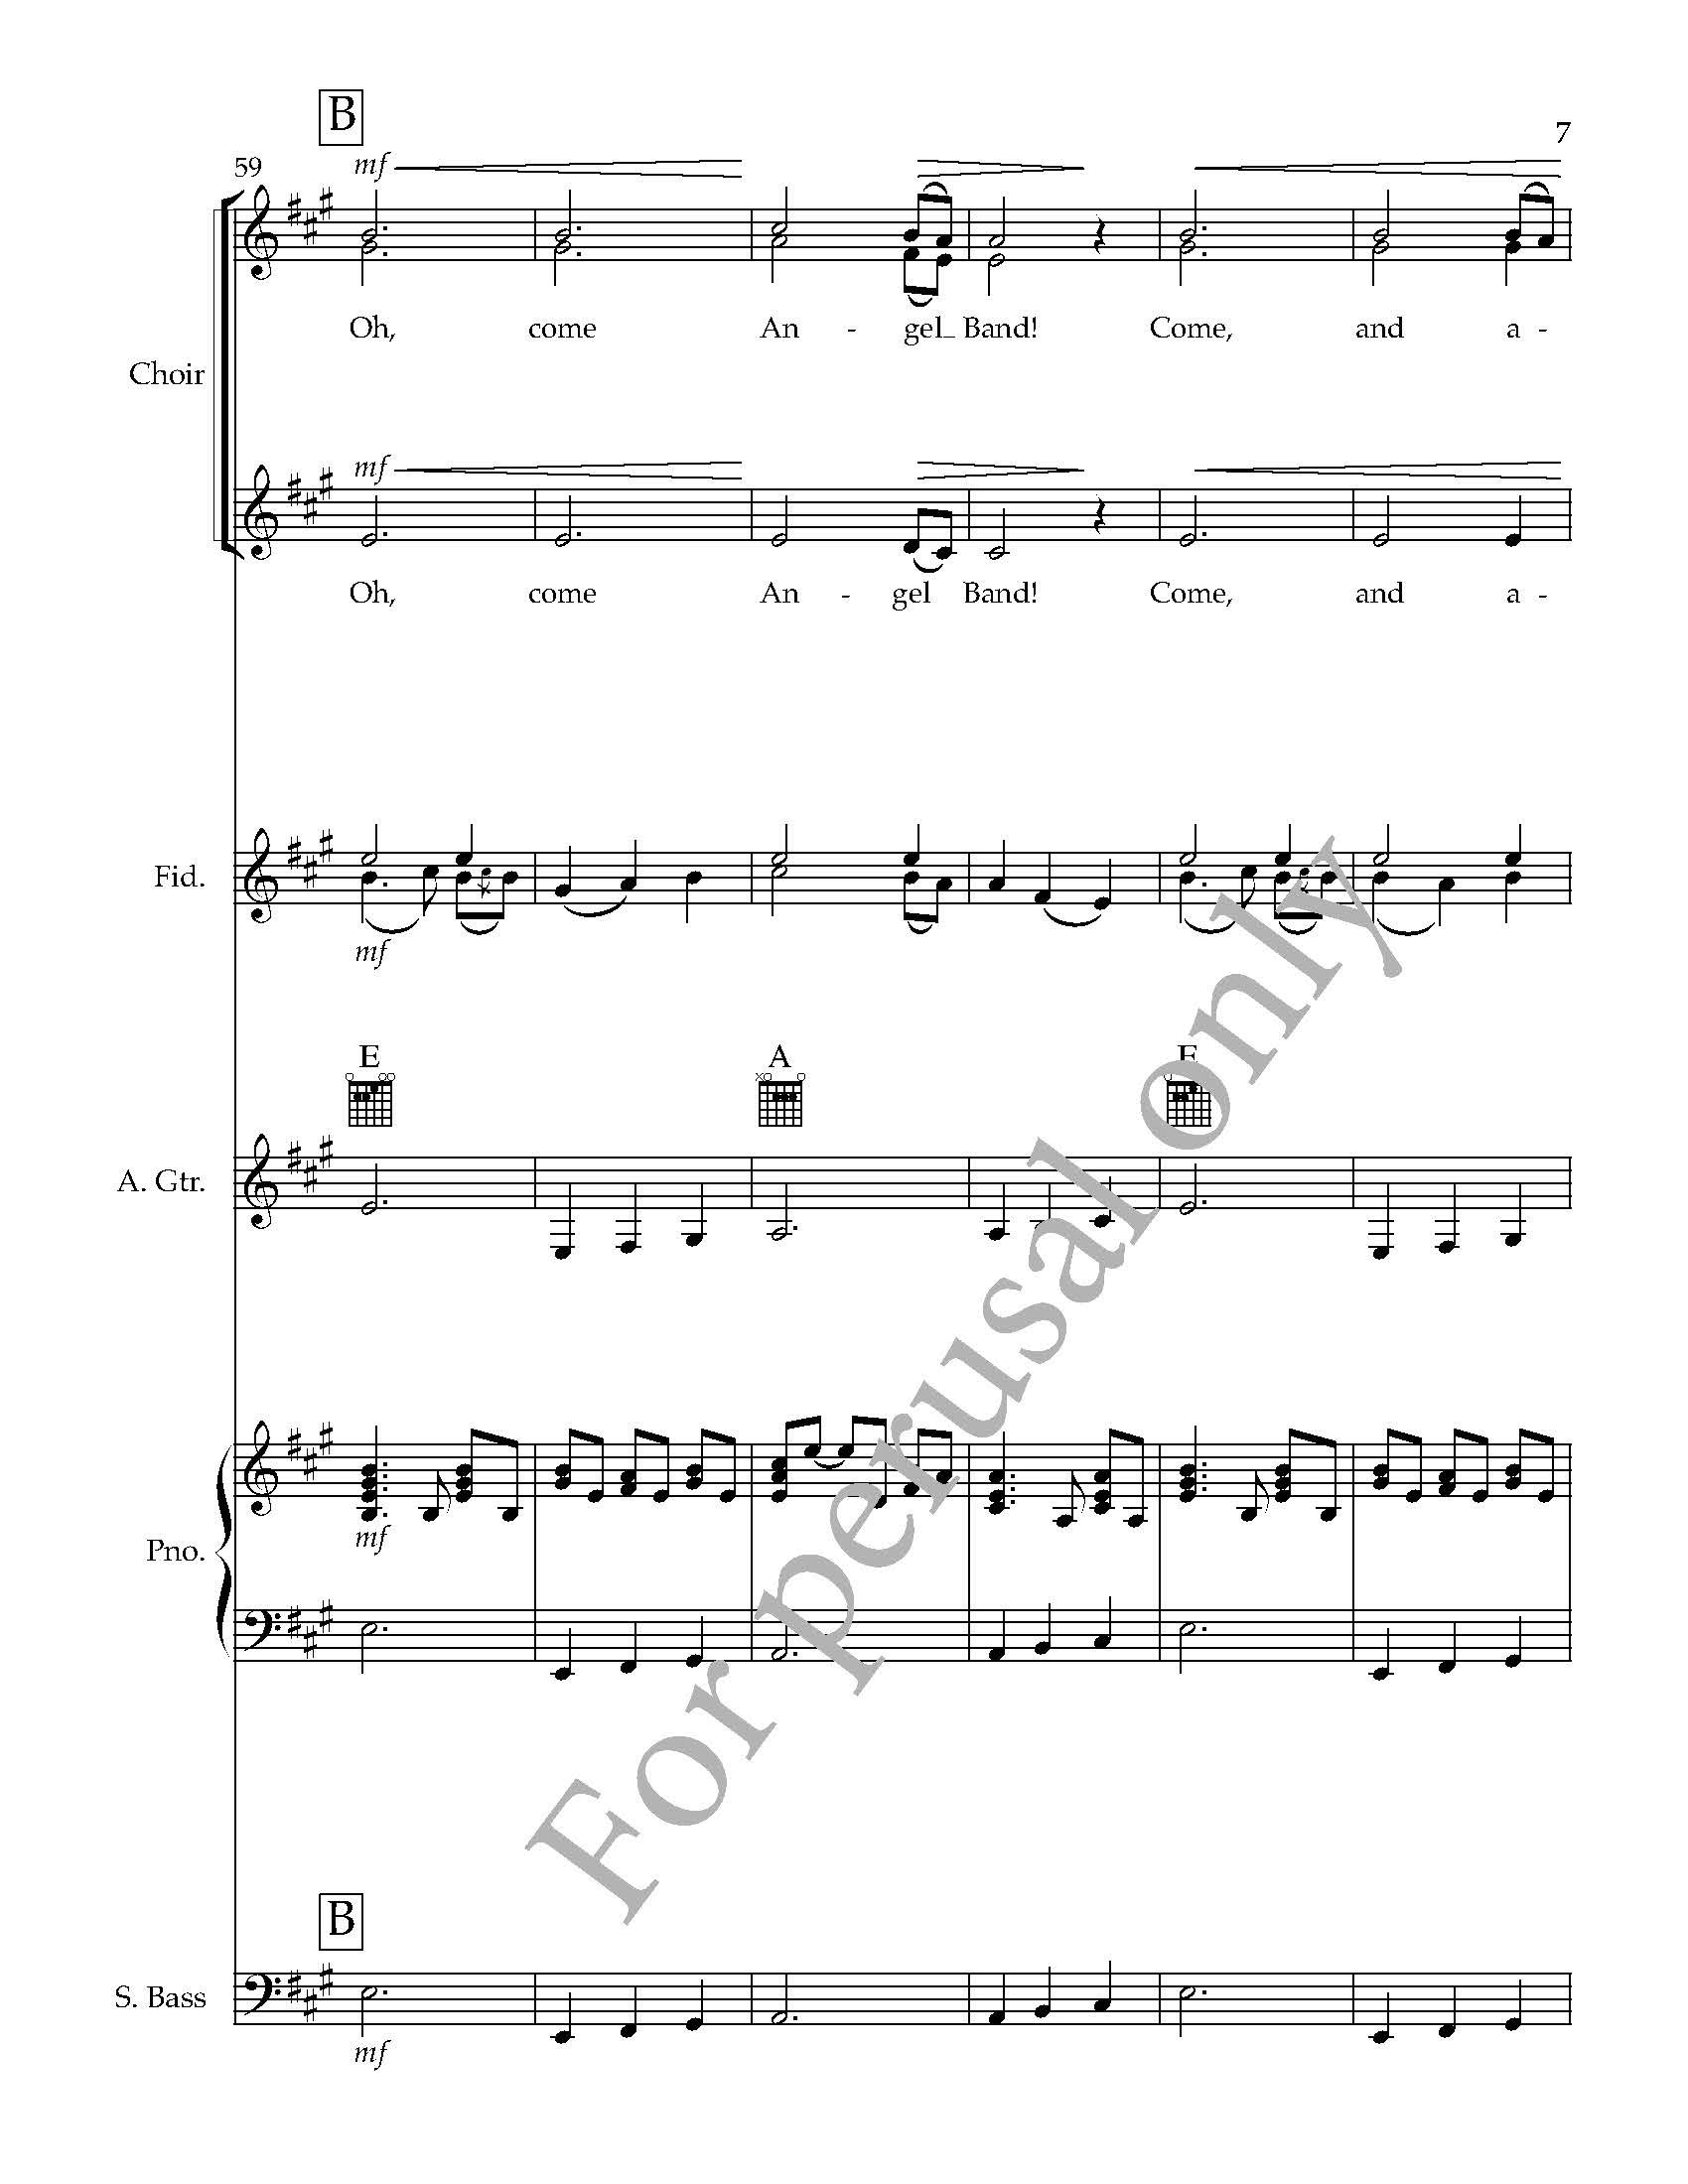 FULL SCORE preview - Angel Band for three-part choir, fiddle, piano, guitar, and bass - arr_Page_07.jpg